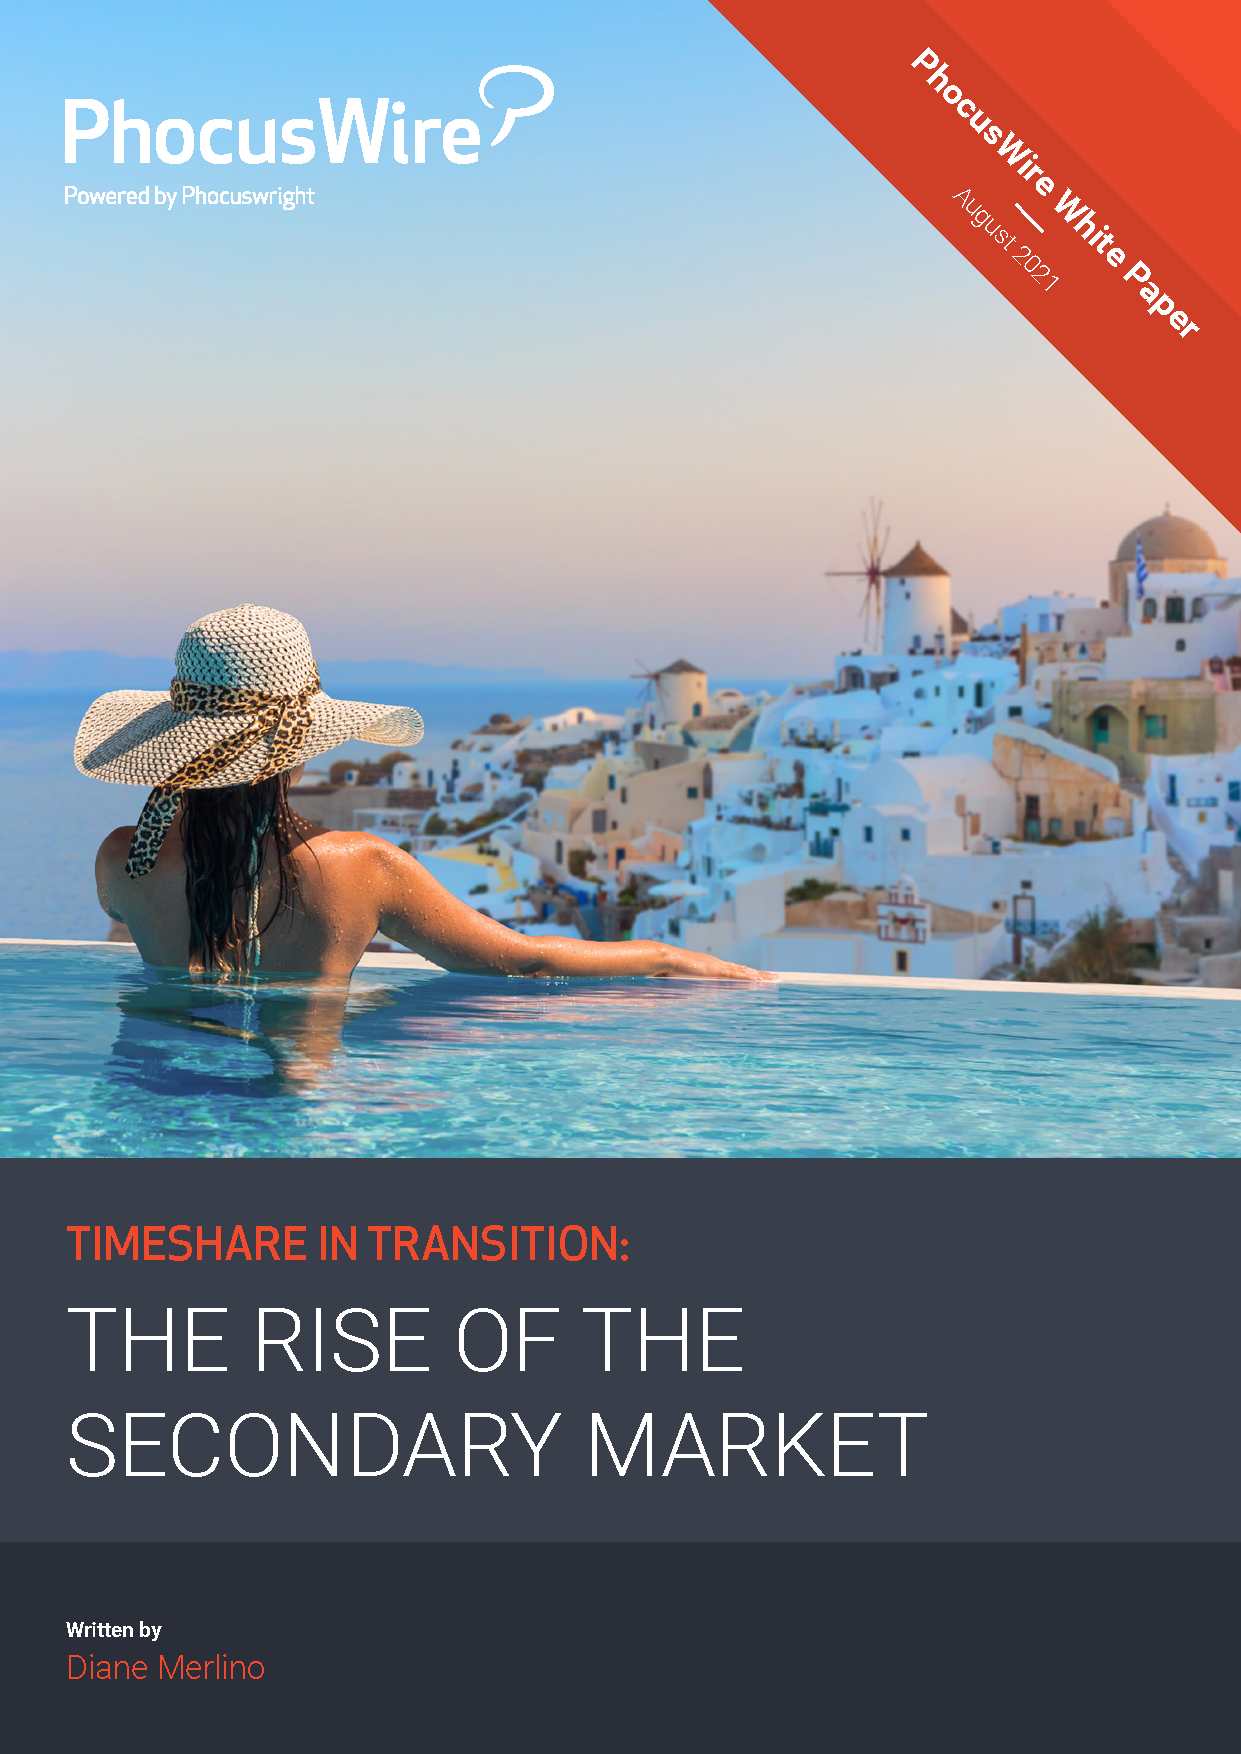 “Timeshare in transition: The rise of the secondary market” was developed by PhocusWire to provide a comprehensive look at this unique, often misunderstood segment of the timeshare industry.